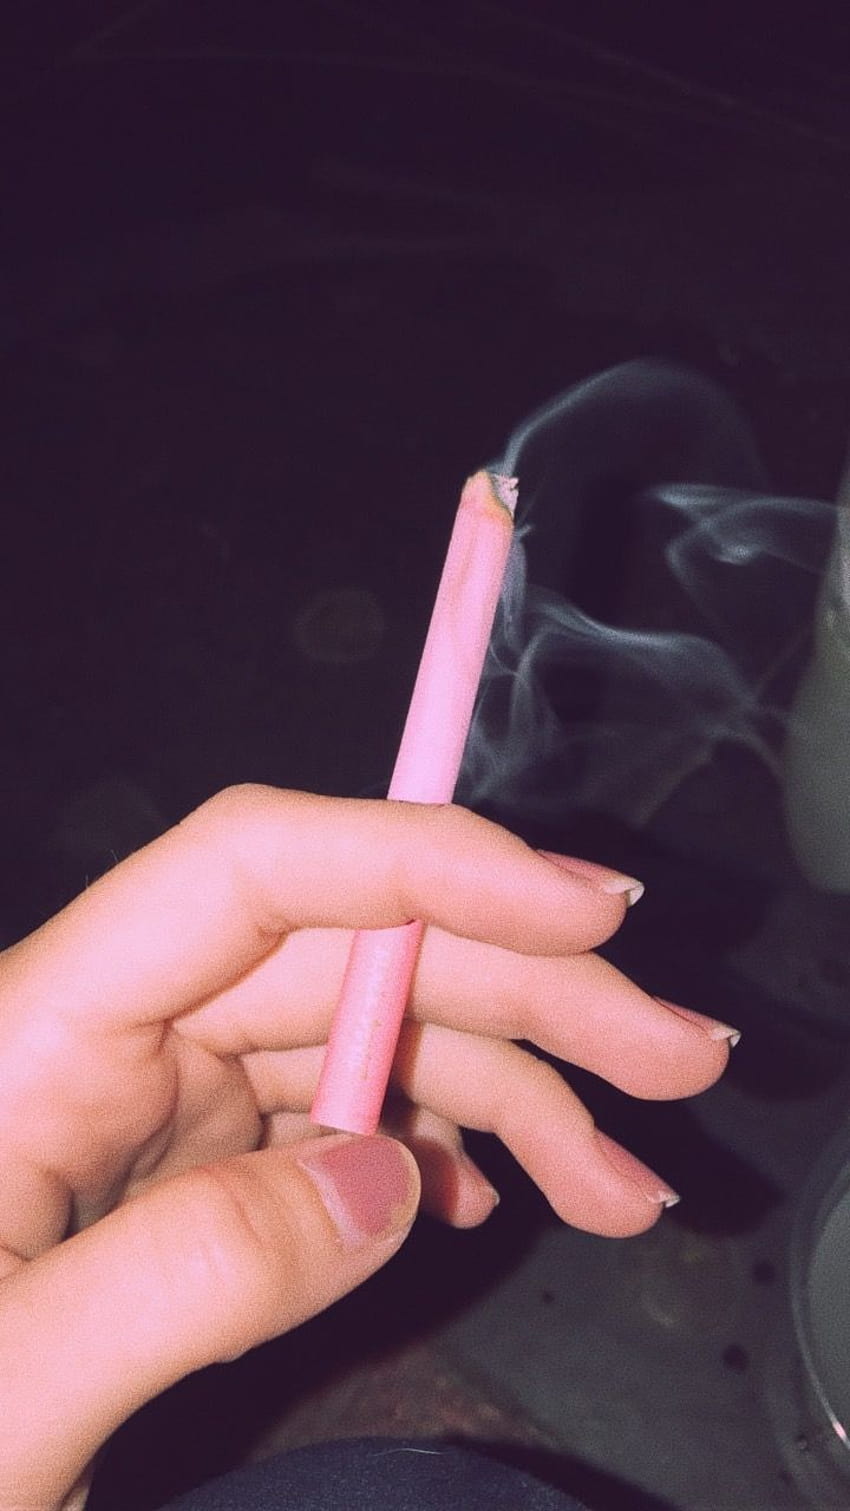 Susie Palmer on twitter said so in 2020, pink girl smoking aesthetic HD phone wallpaper